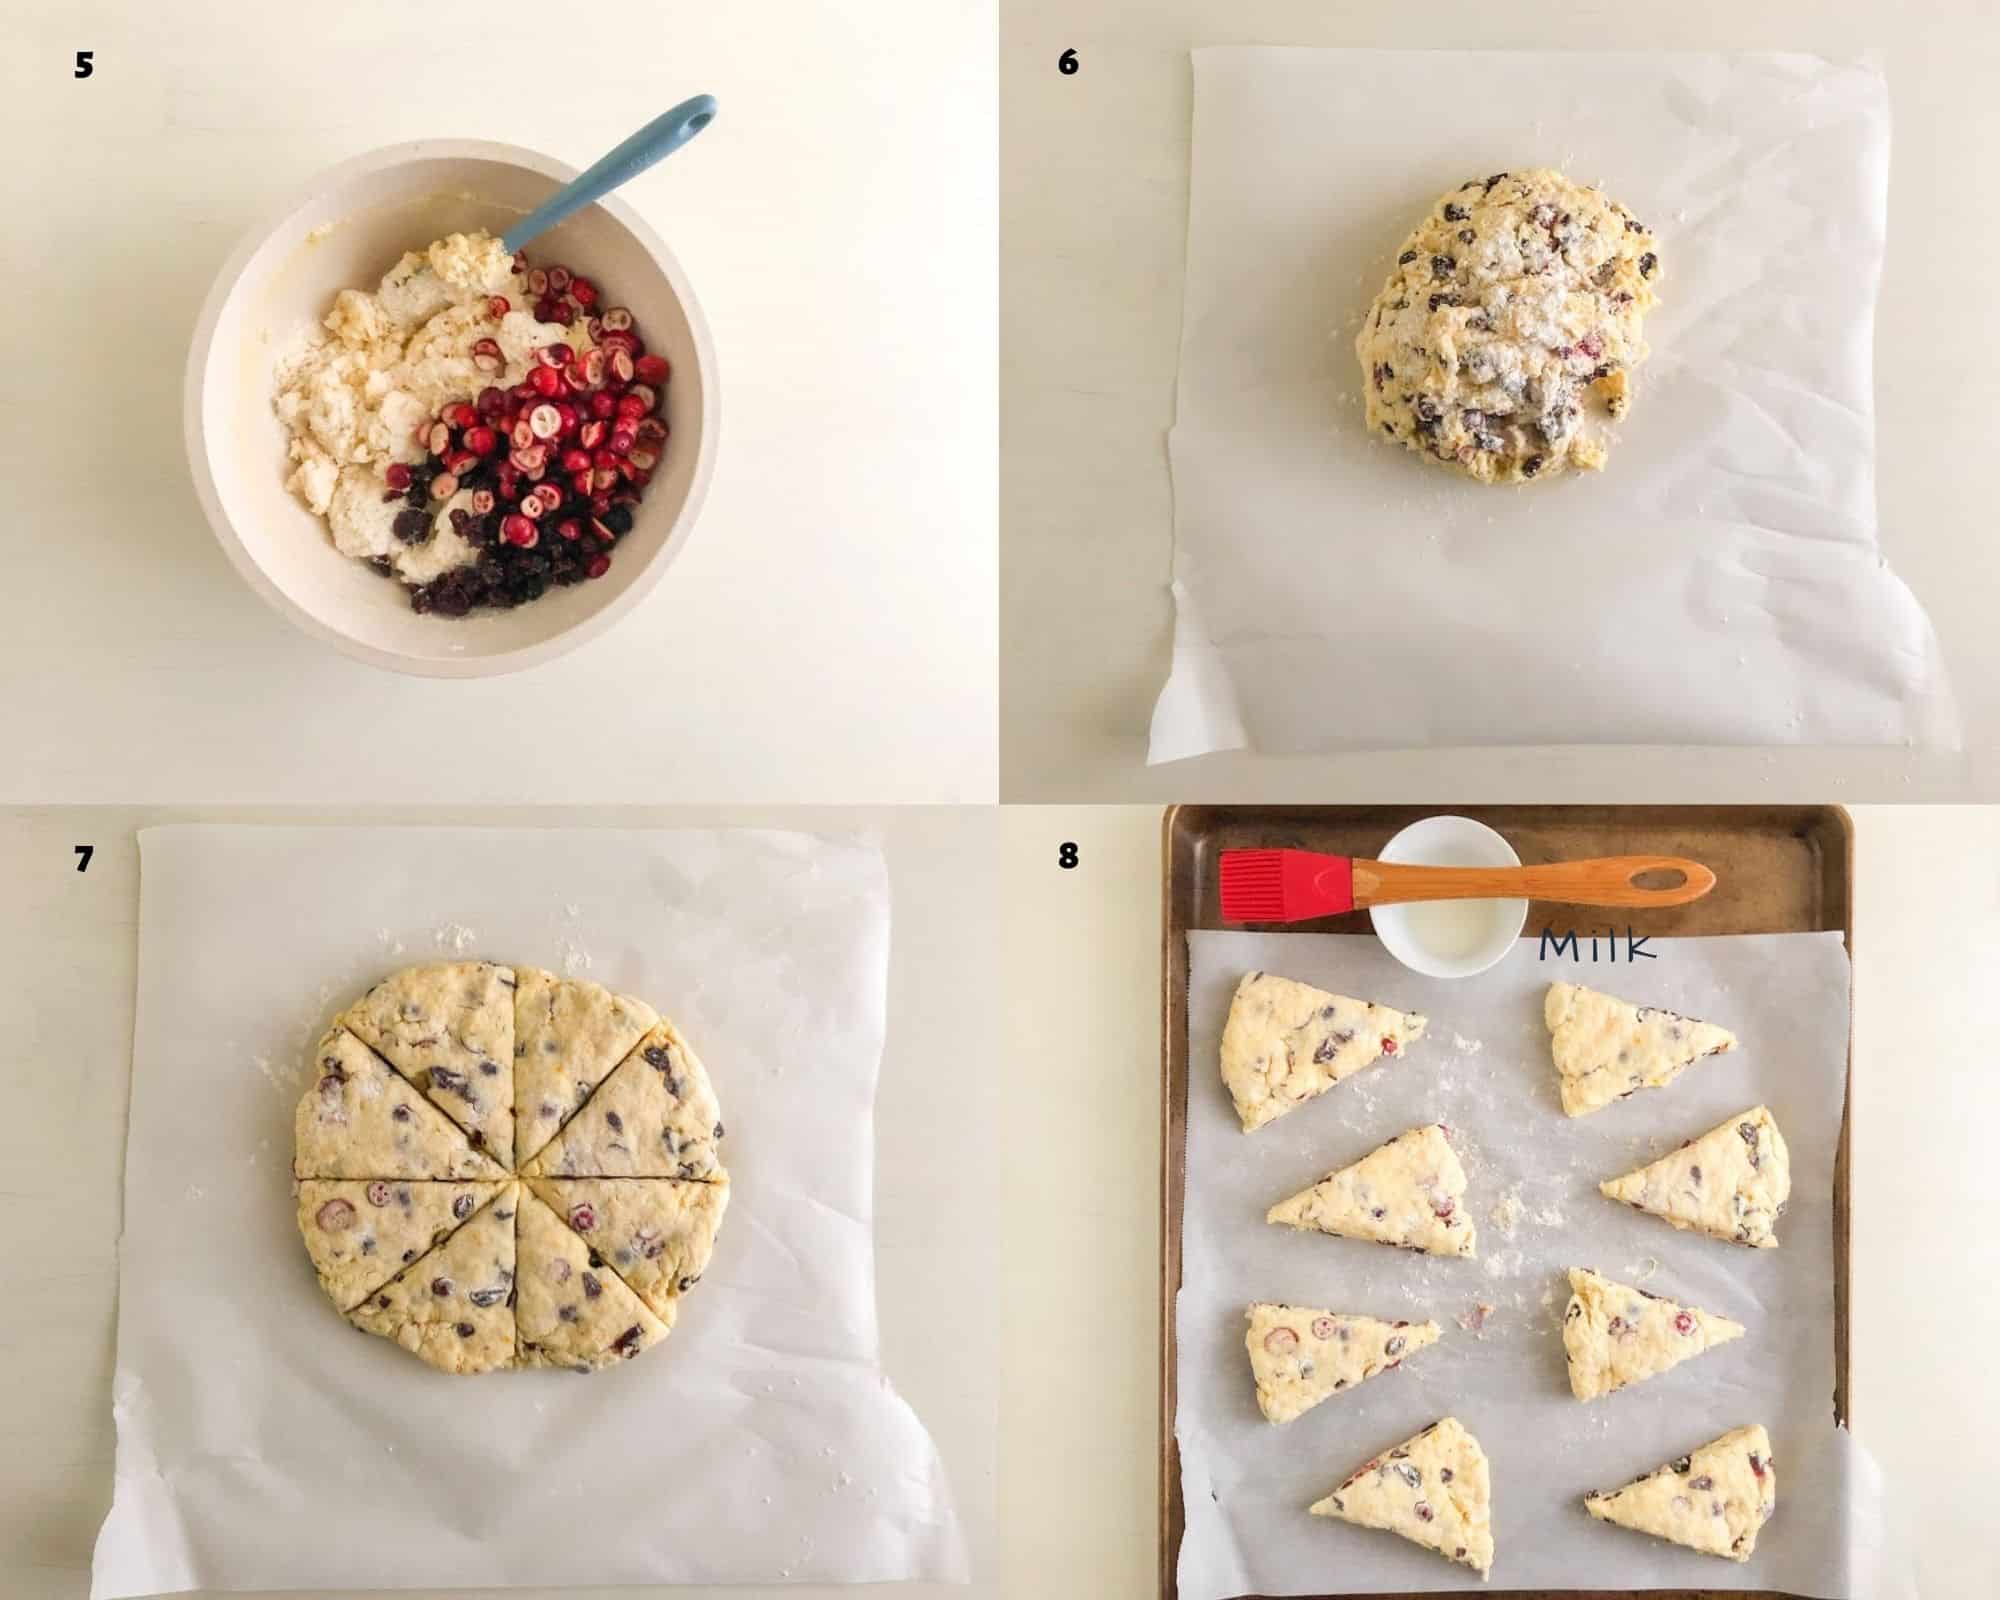 Process shots for mixing and shaping of the scones.